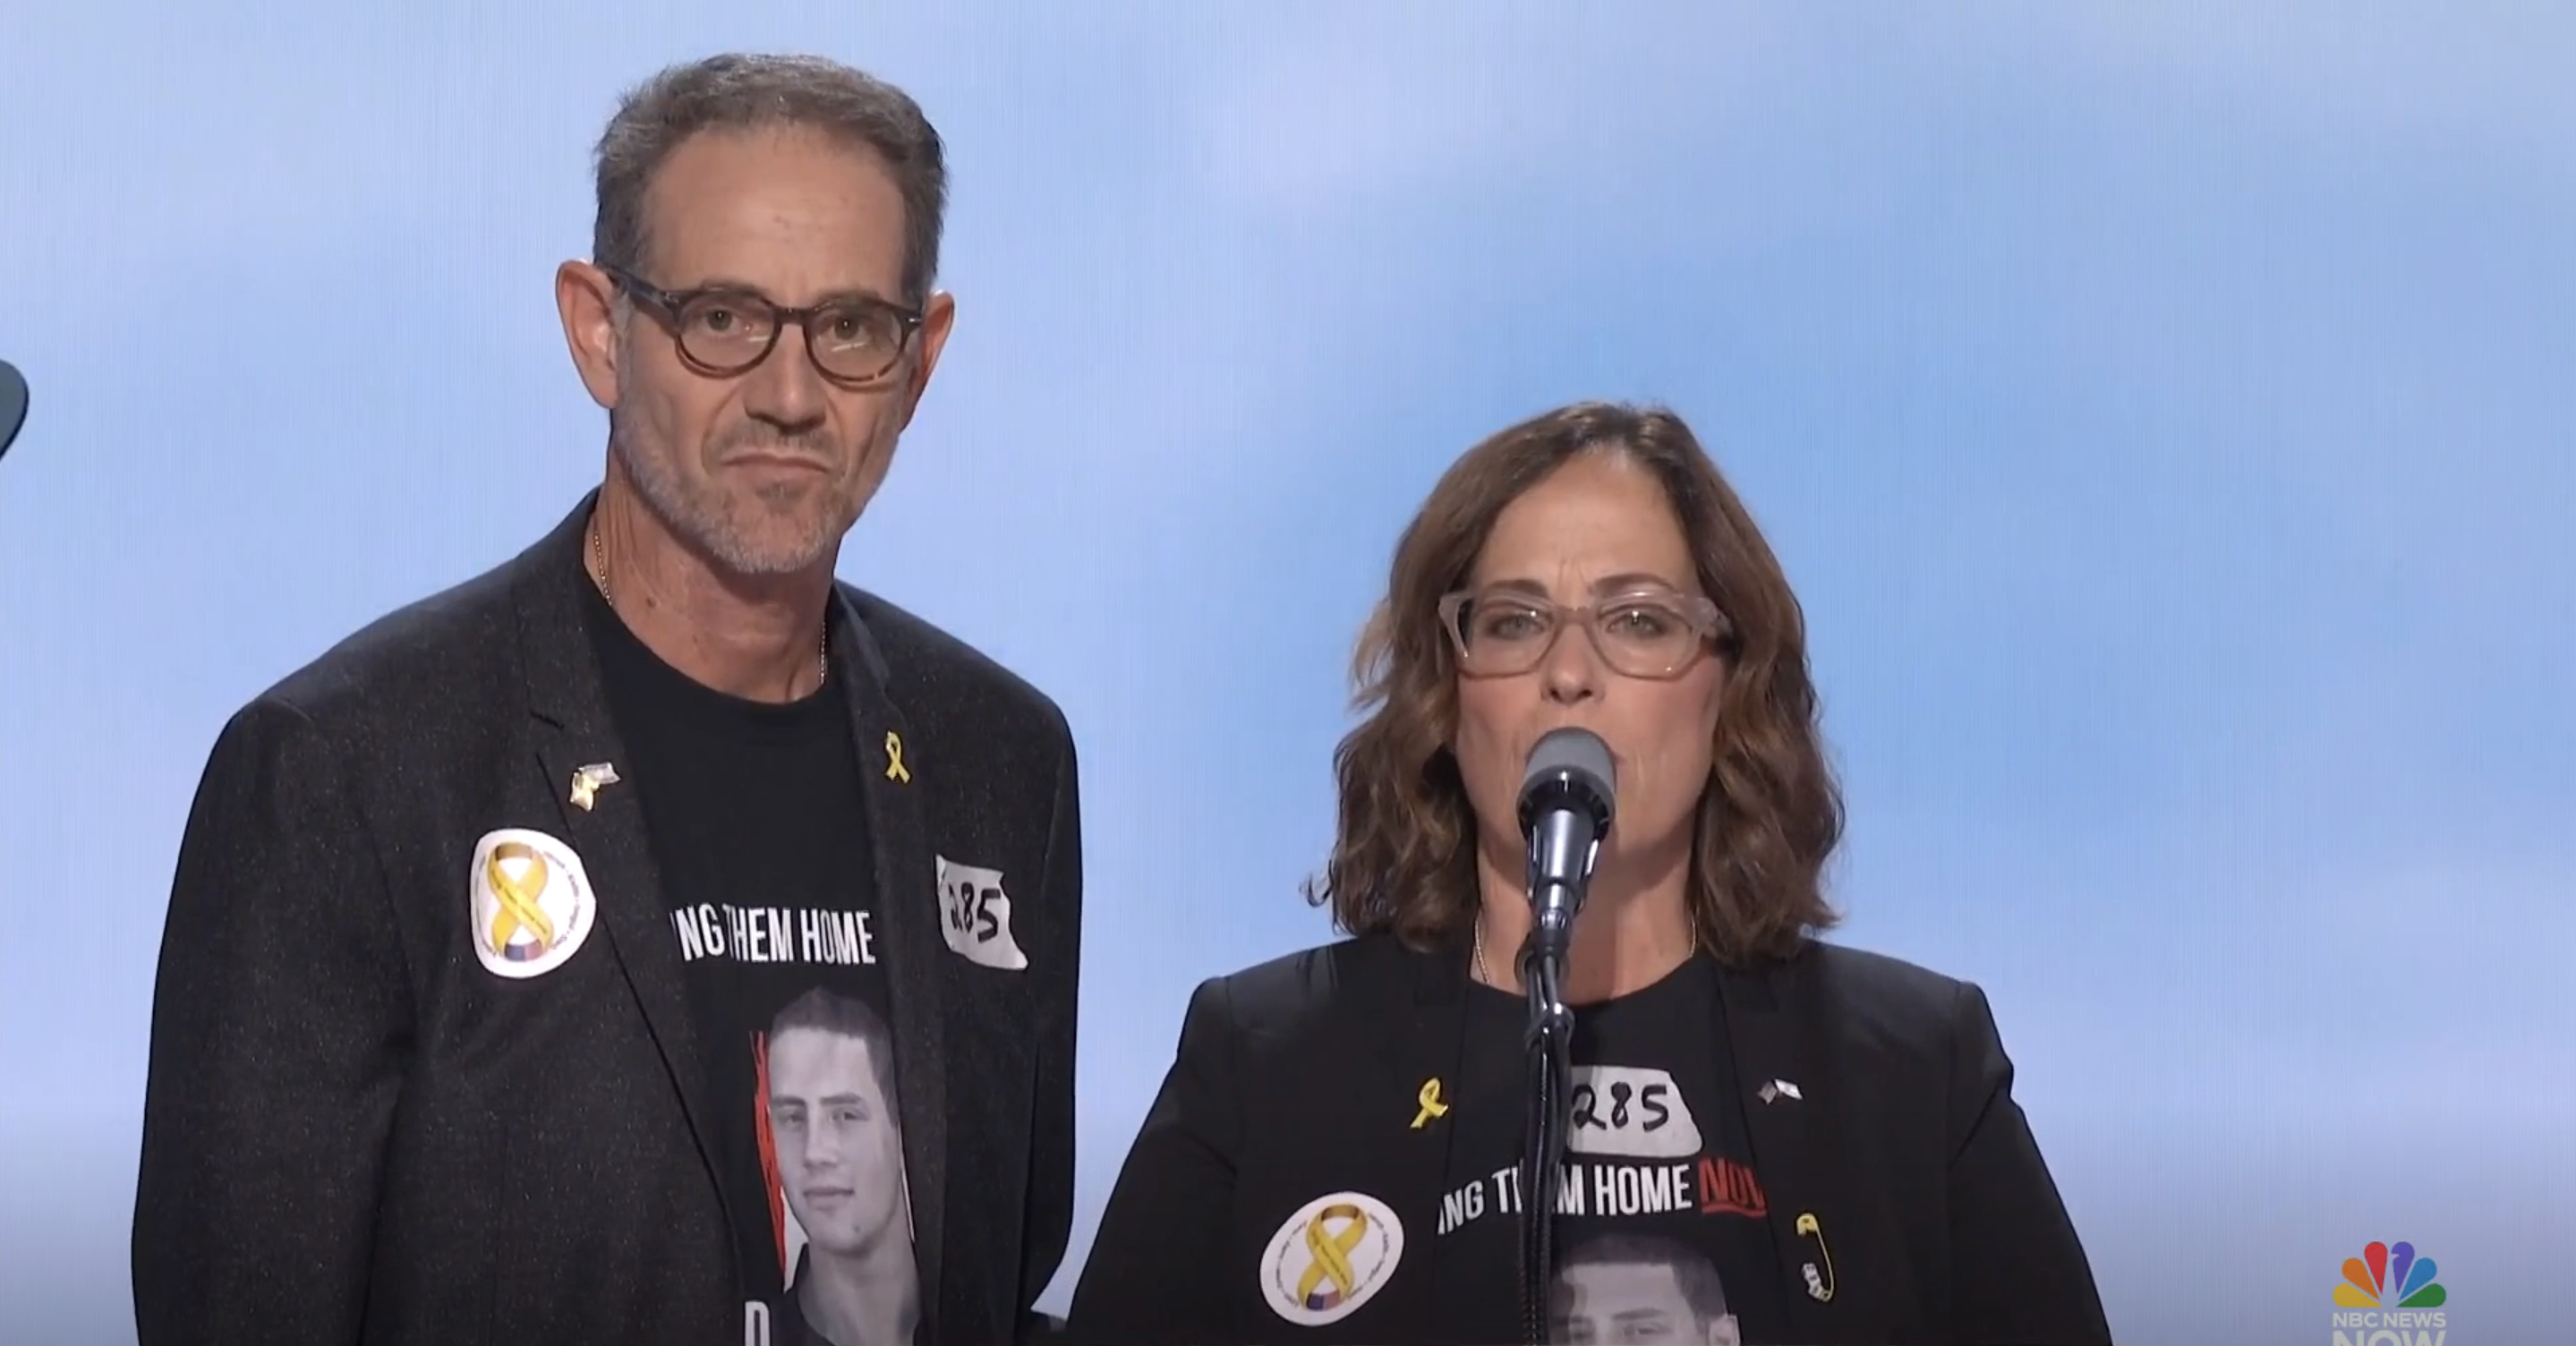 American hostage families’ message for Netanyahu in D.C. meeting: Bring them home now